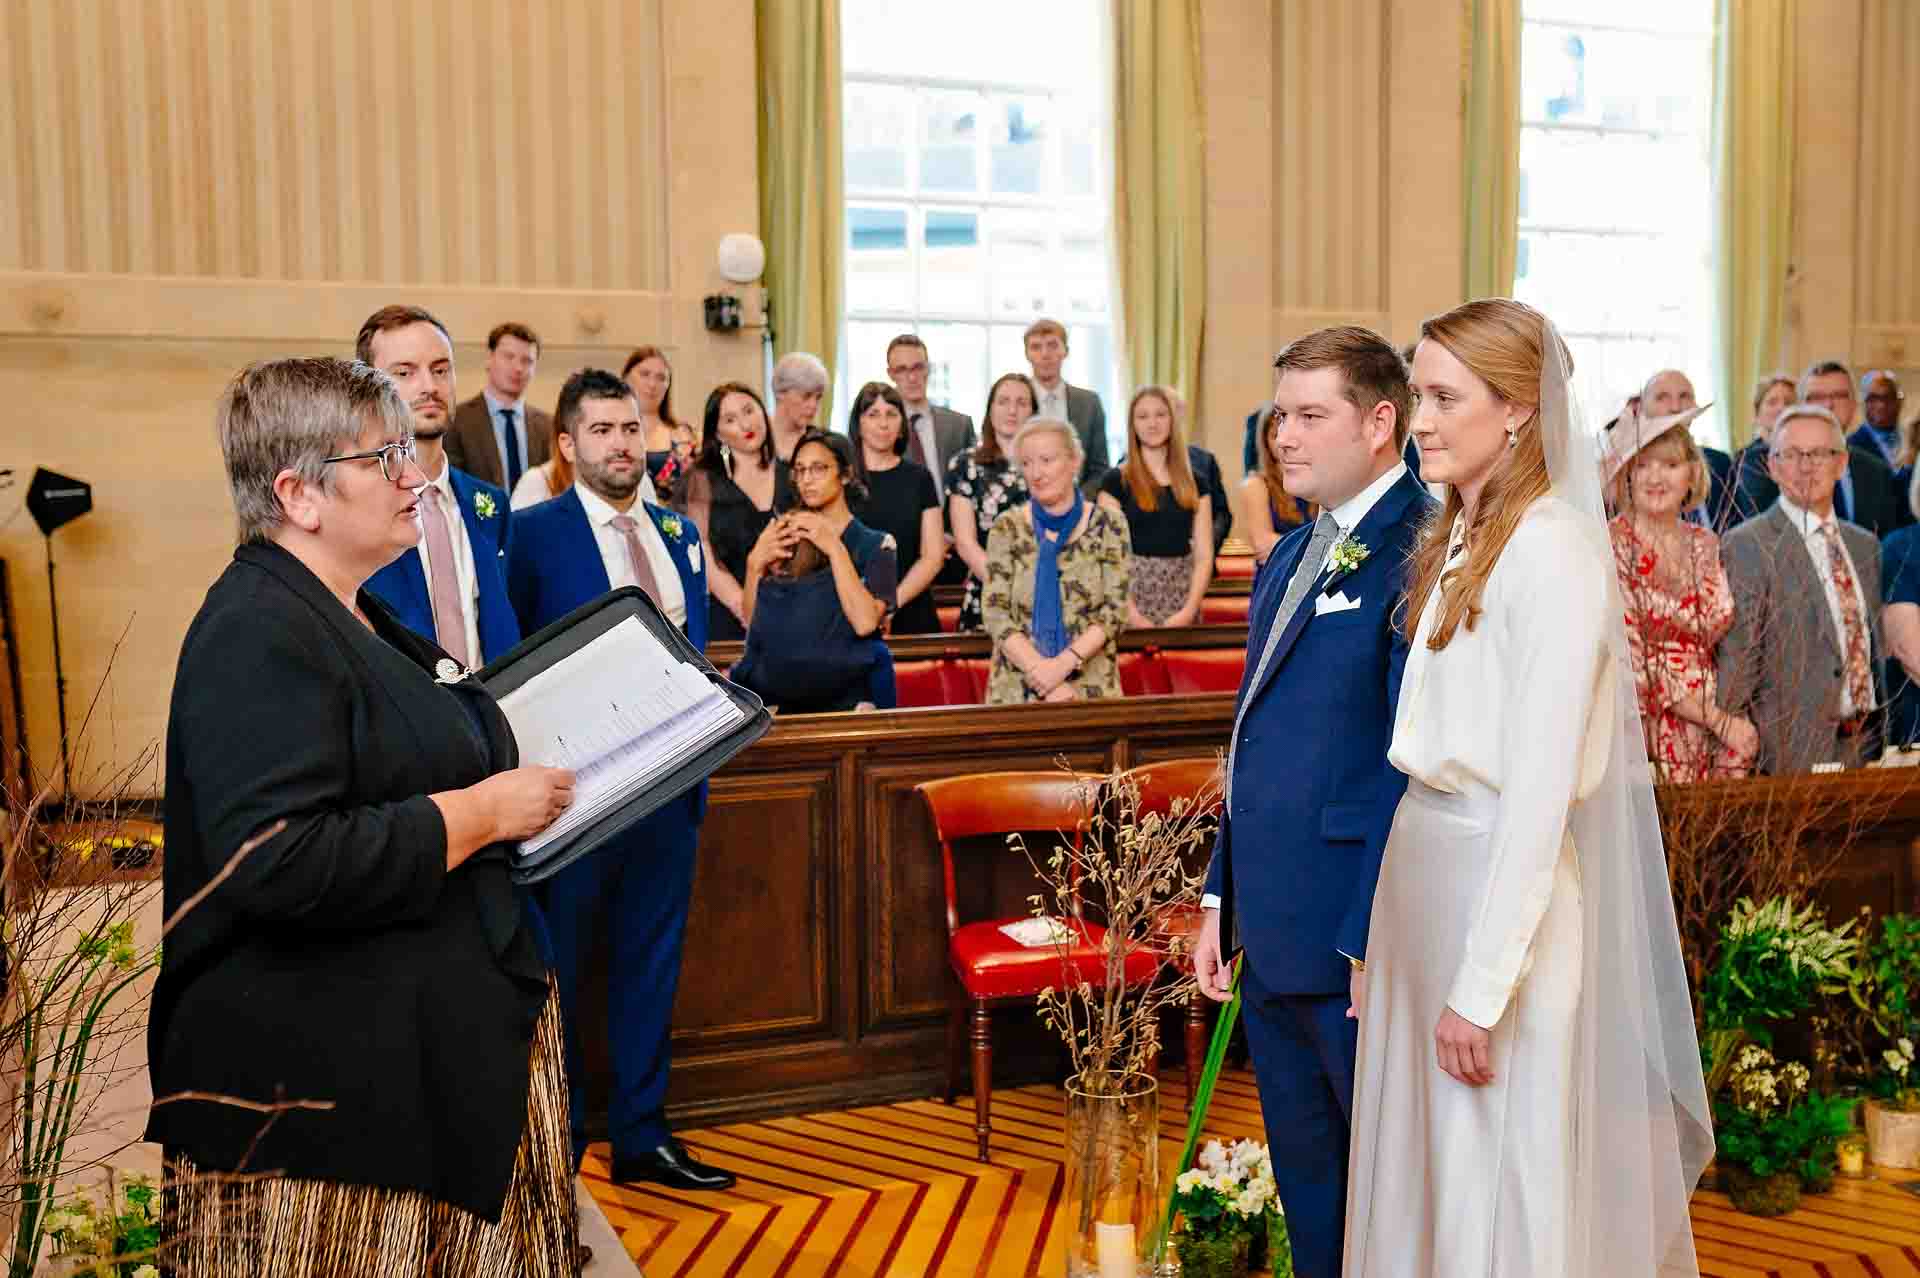 Registrar reads the vows to the couple at Bristol City Hall marriage ceremony